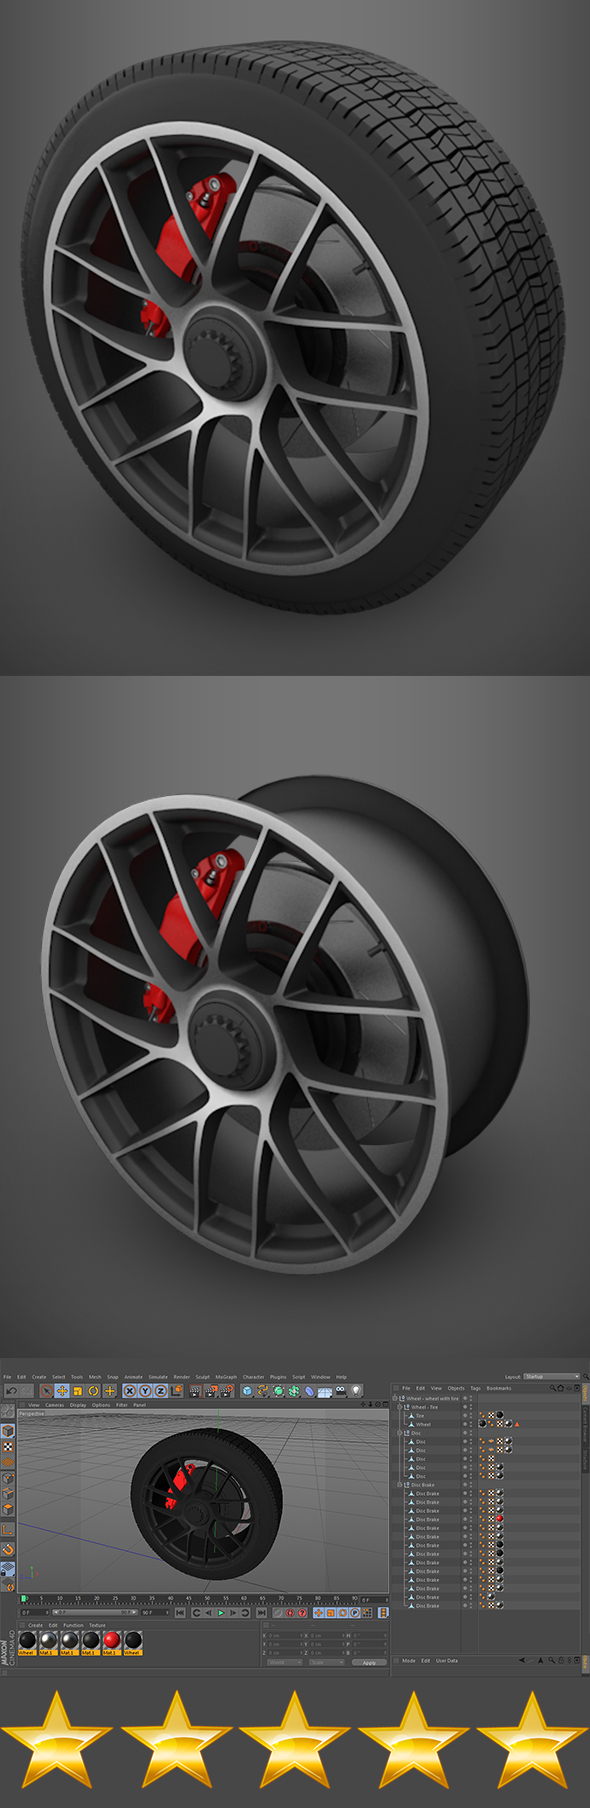 Wheel with tire - 3Docean 23067803